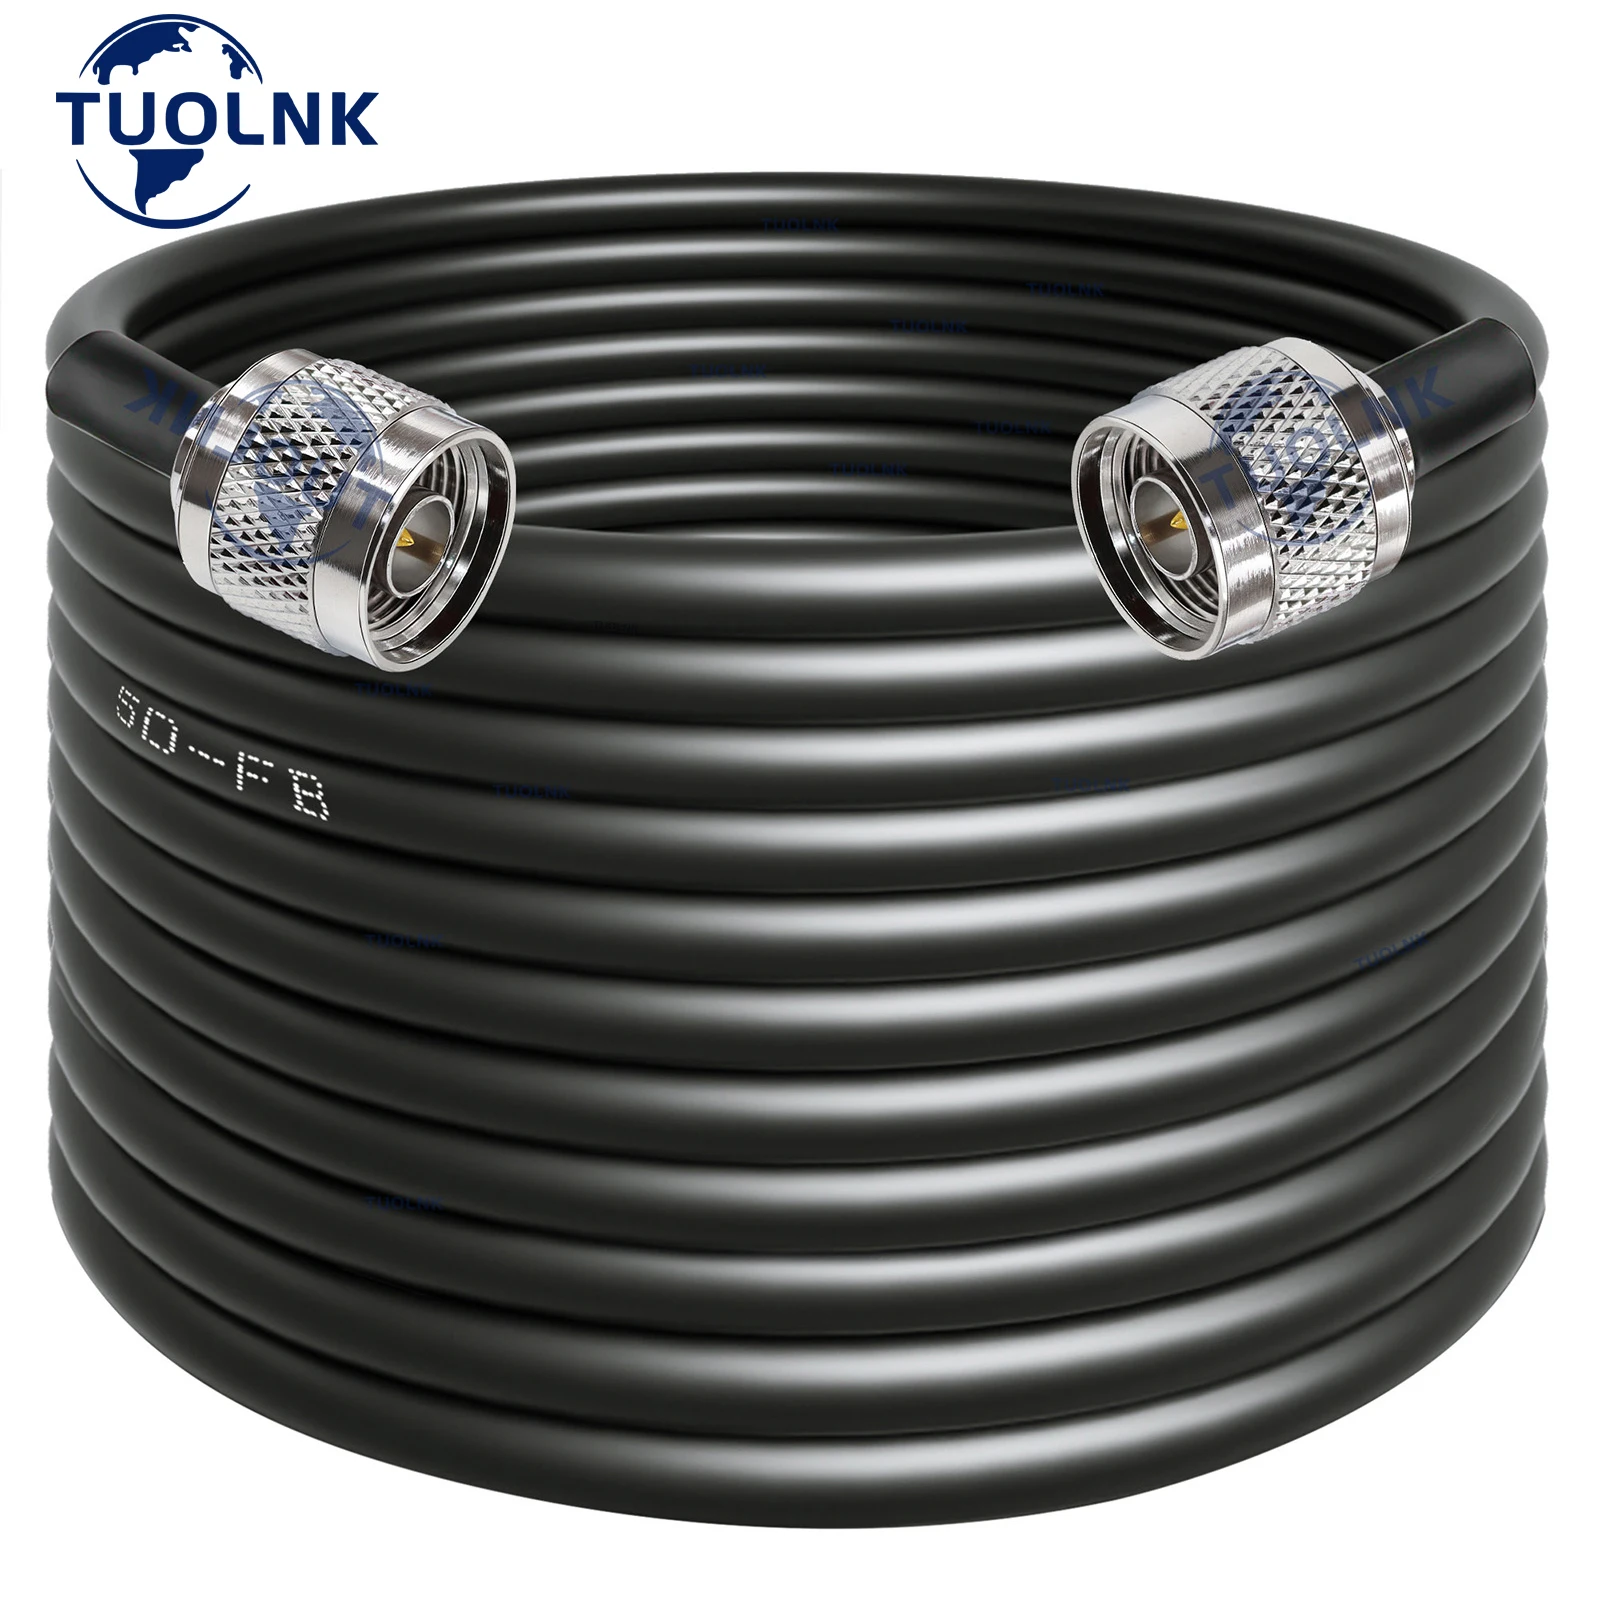 5D FB N Type Extension Cable N to N Male Female Connector Coaxial Cable for CDMA GSM 3G 4G LTE WiFi Antenna RF Coax Cable